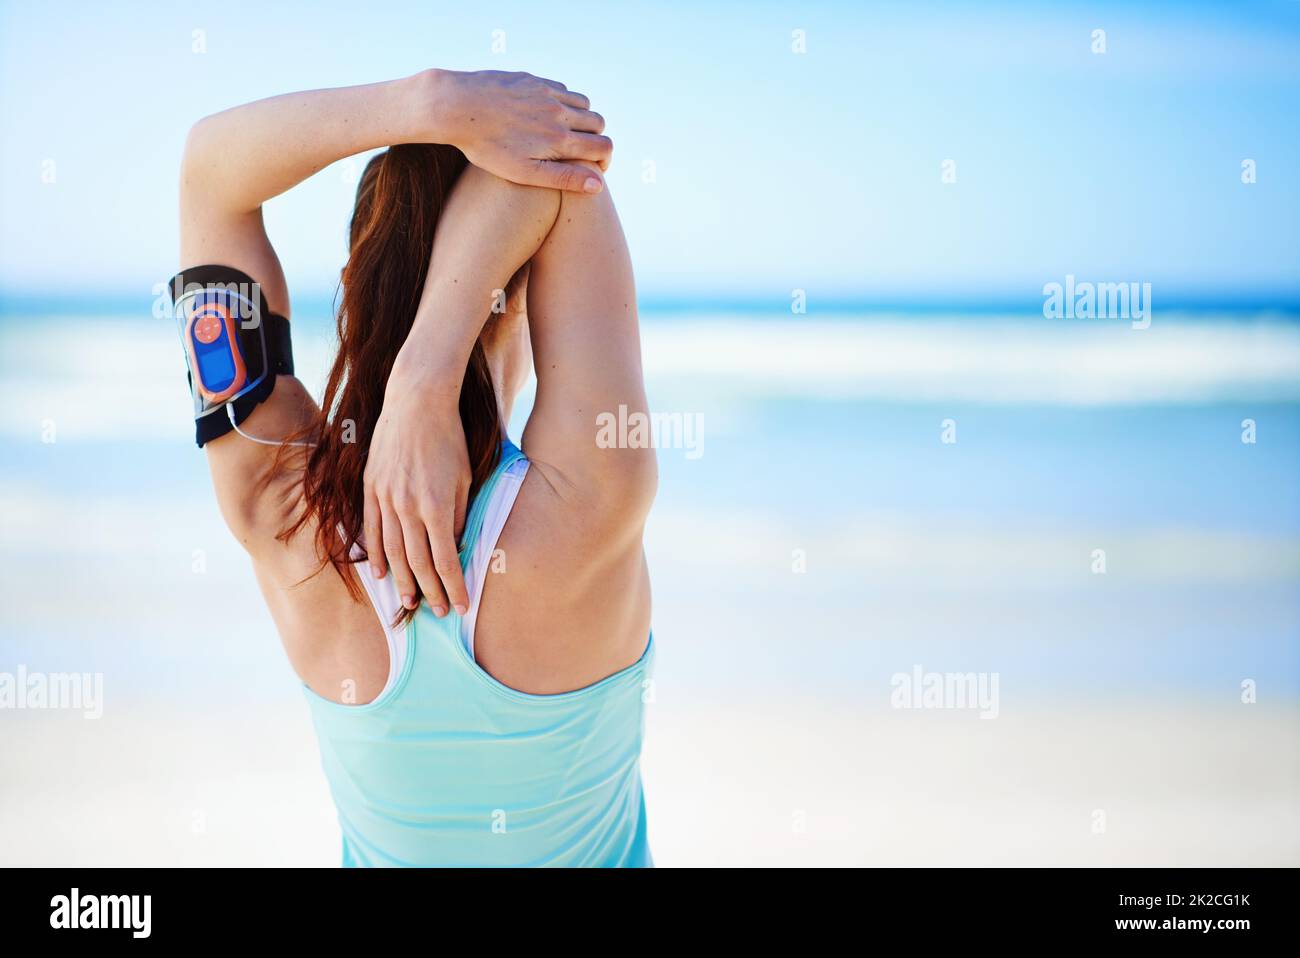 Preparing for a run. Rearview shot of a young woman stretching before a work out on the beach. Stock Photo